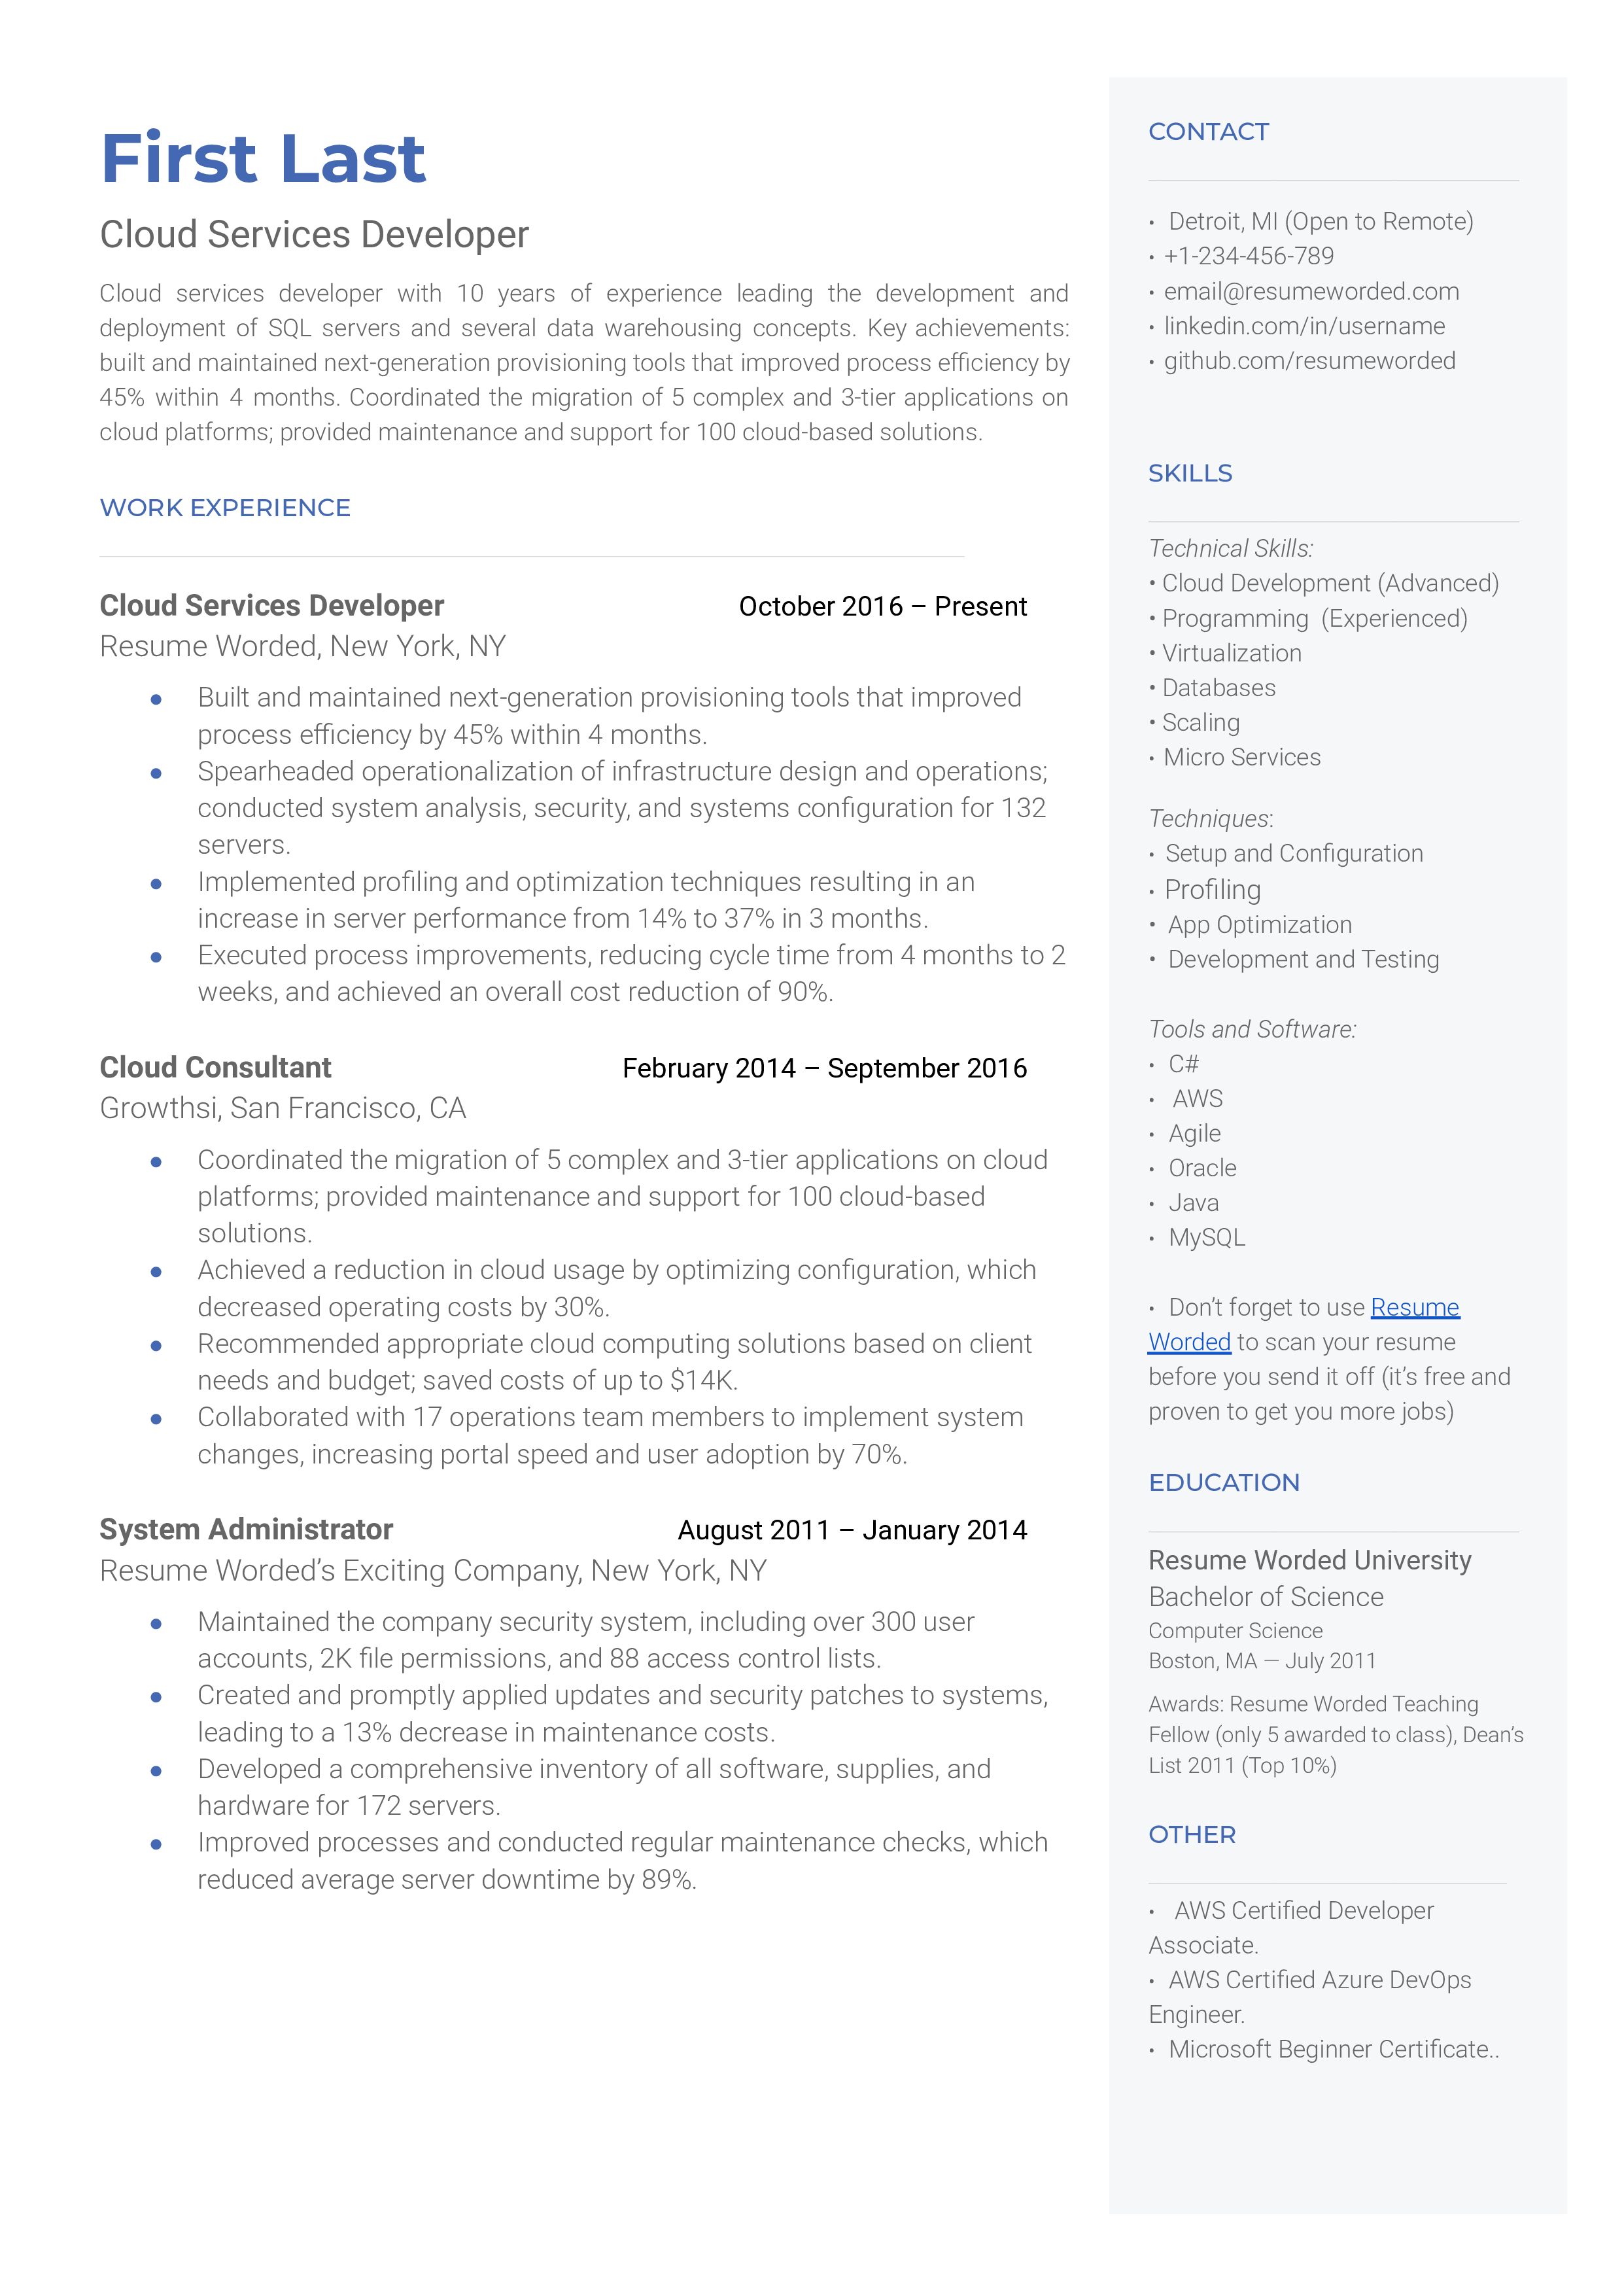 A CV for a Cloud Services Developer showcasing programming skills and cloud platform experience.